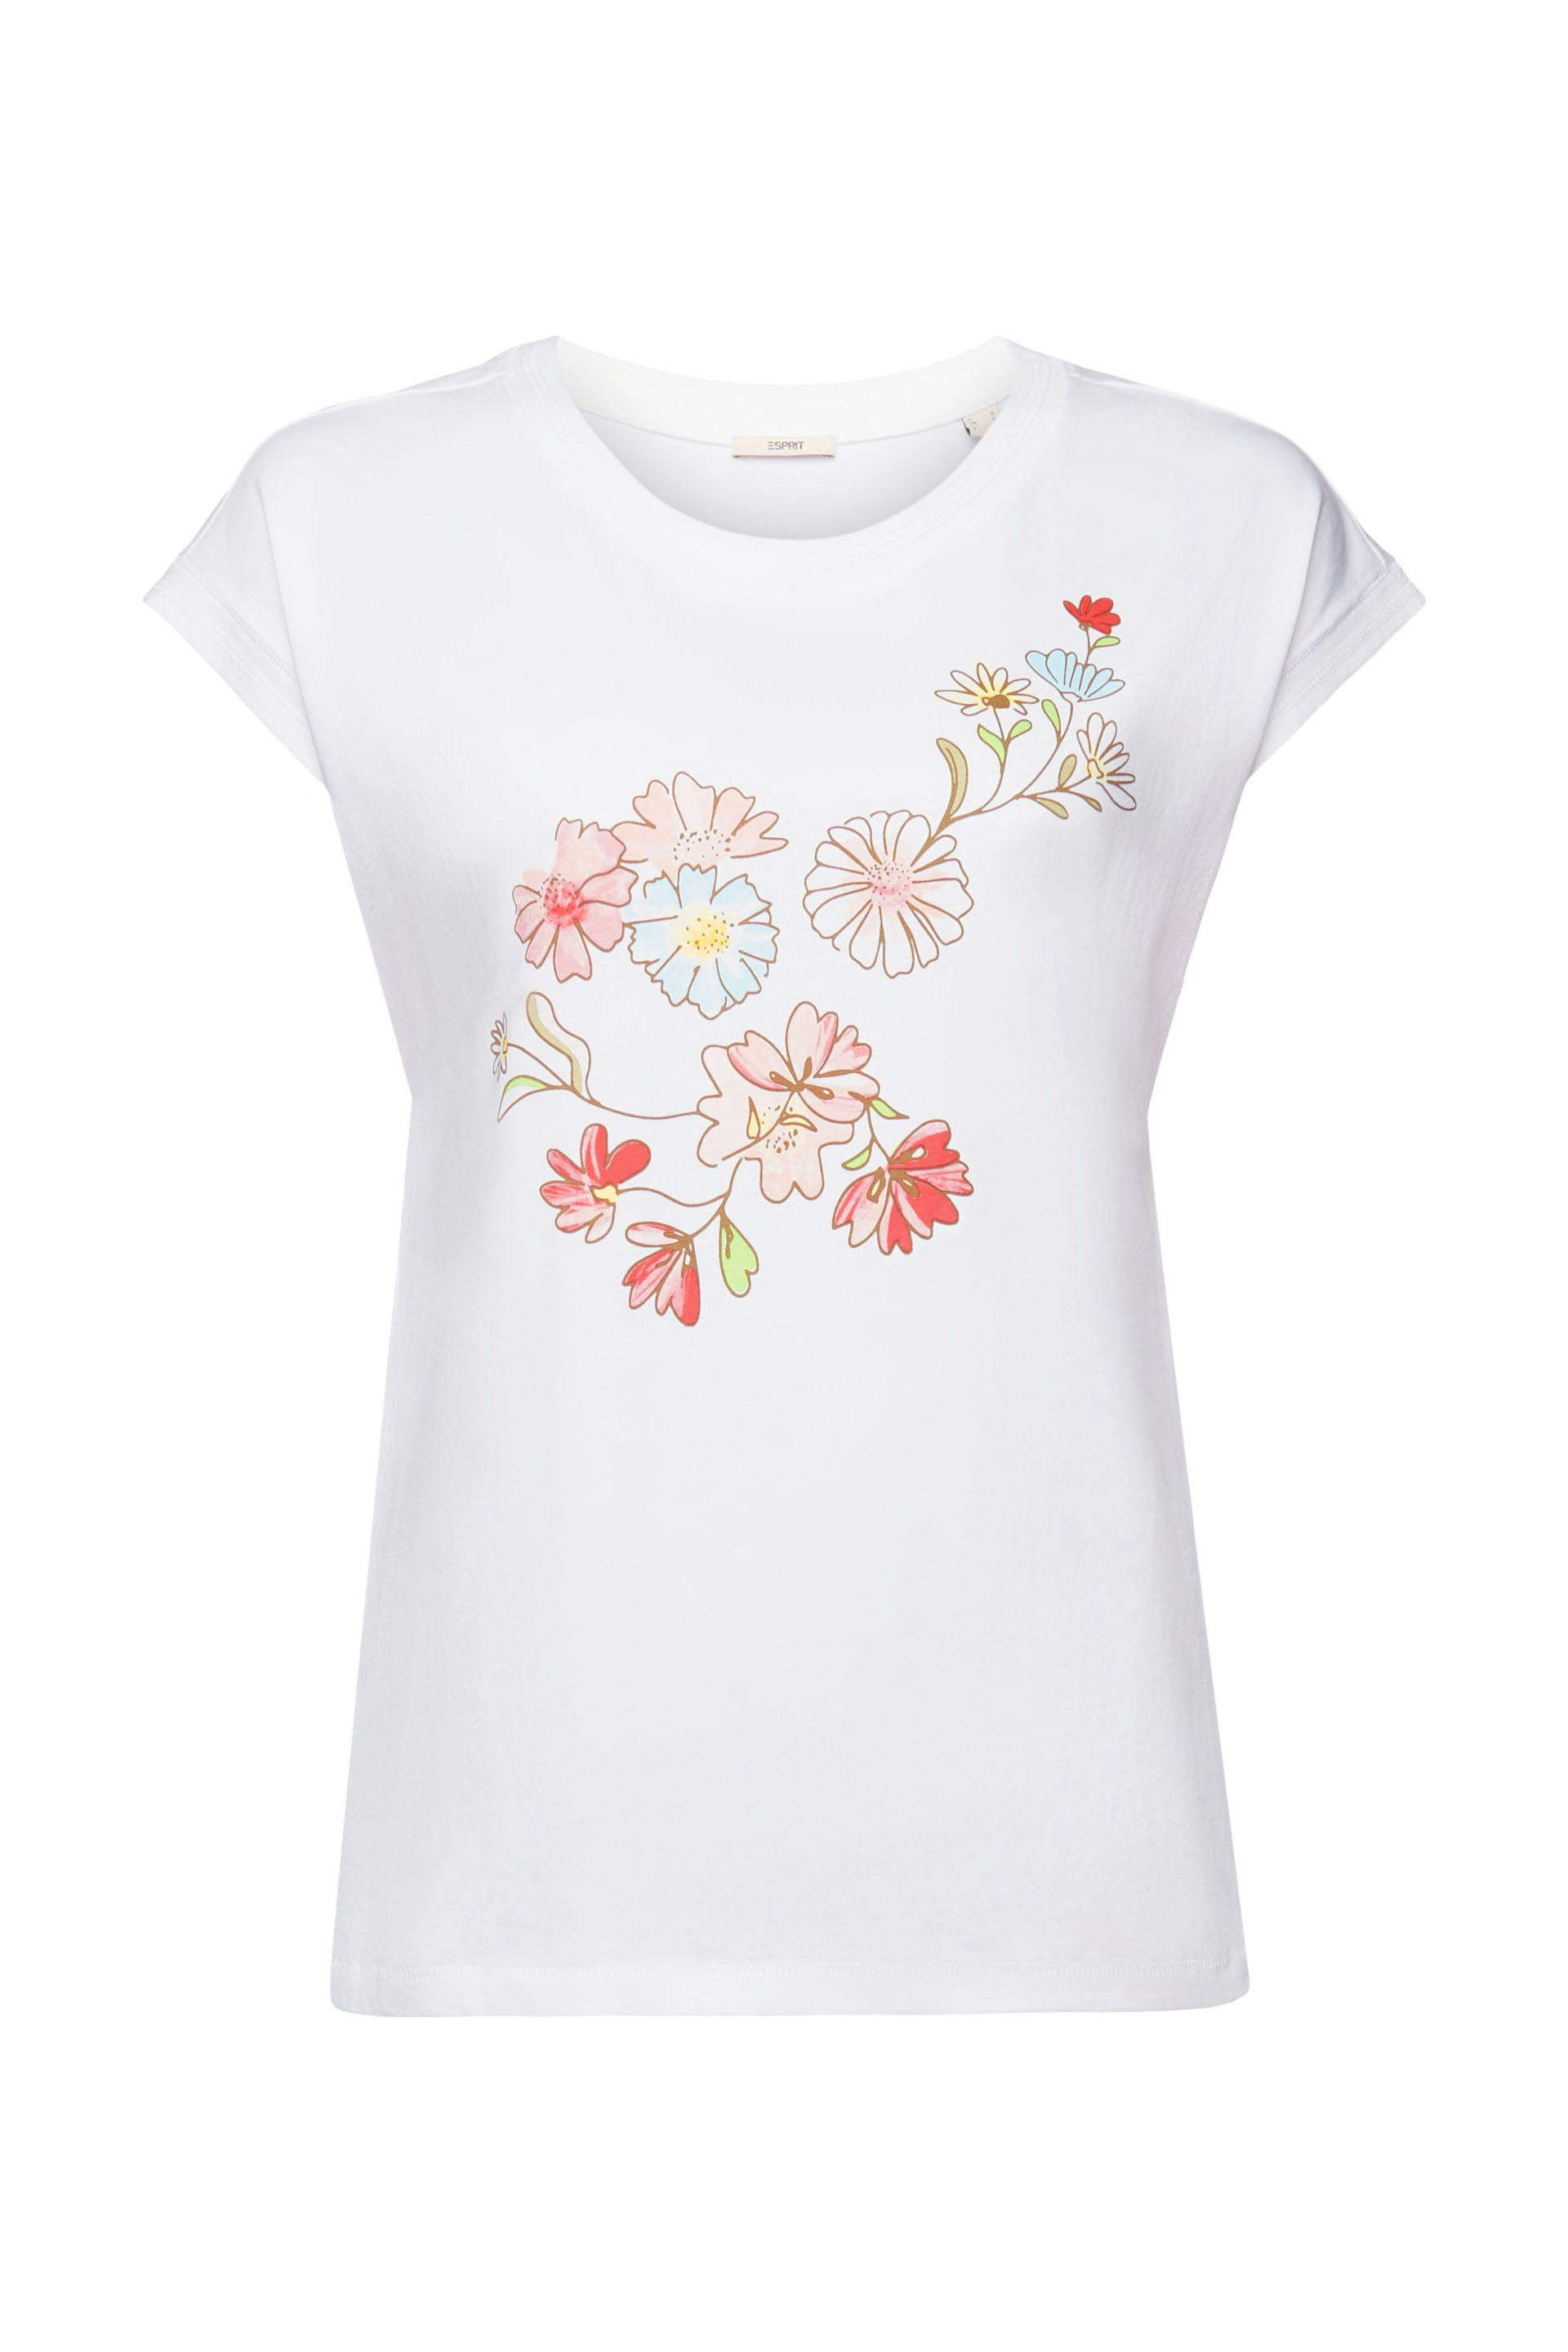 Esprit - Cotton T-shirt with print, White, large image number 0